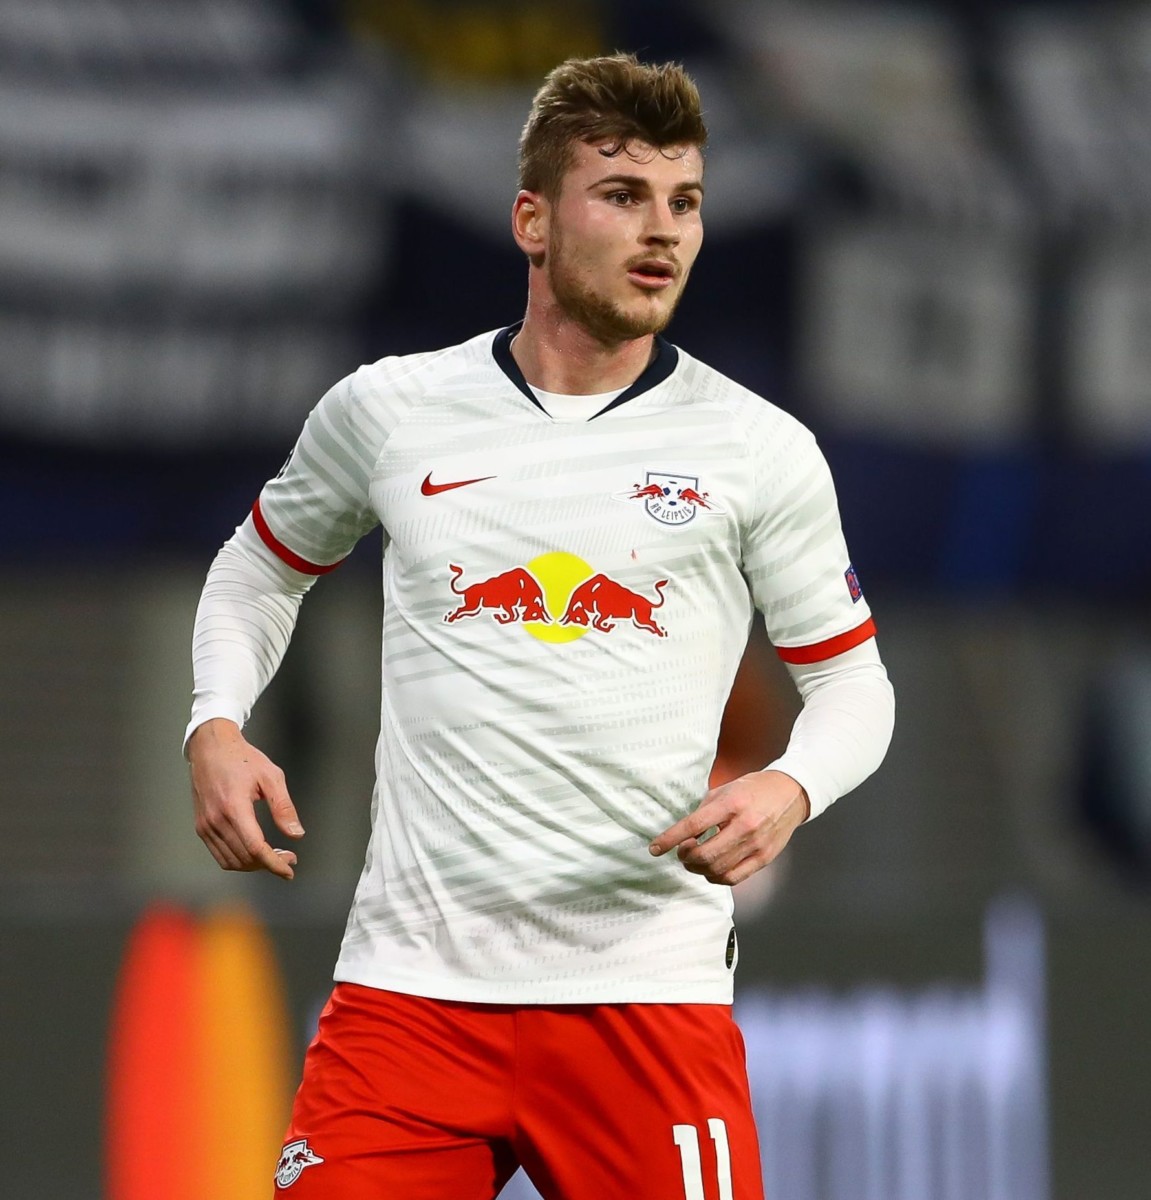 , Chelsea and Liverpool transfer target Timo Werner ‘taking English lessons’ in huge hint at Premier League move